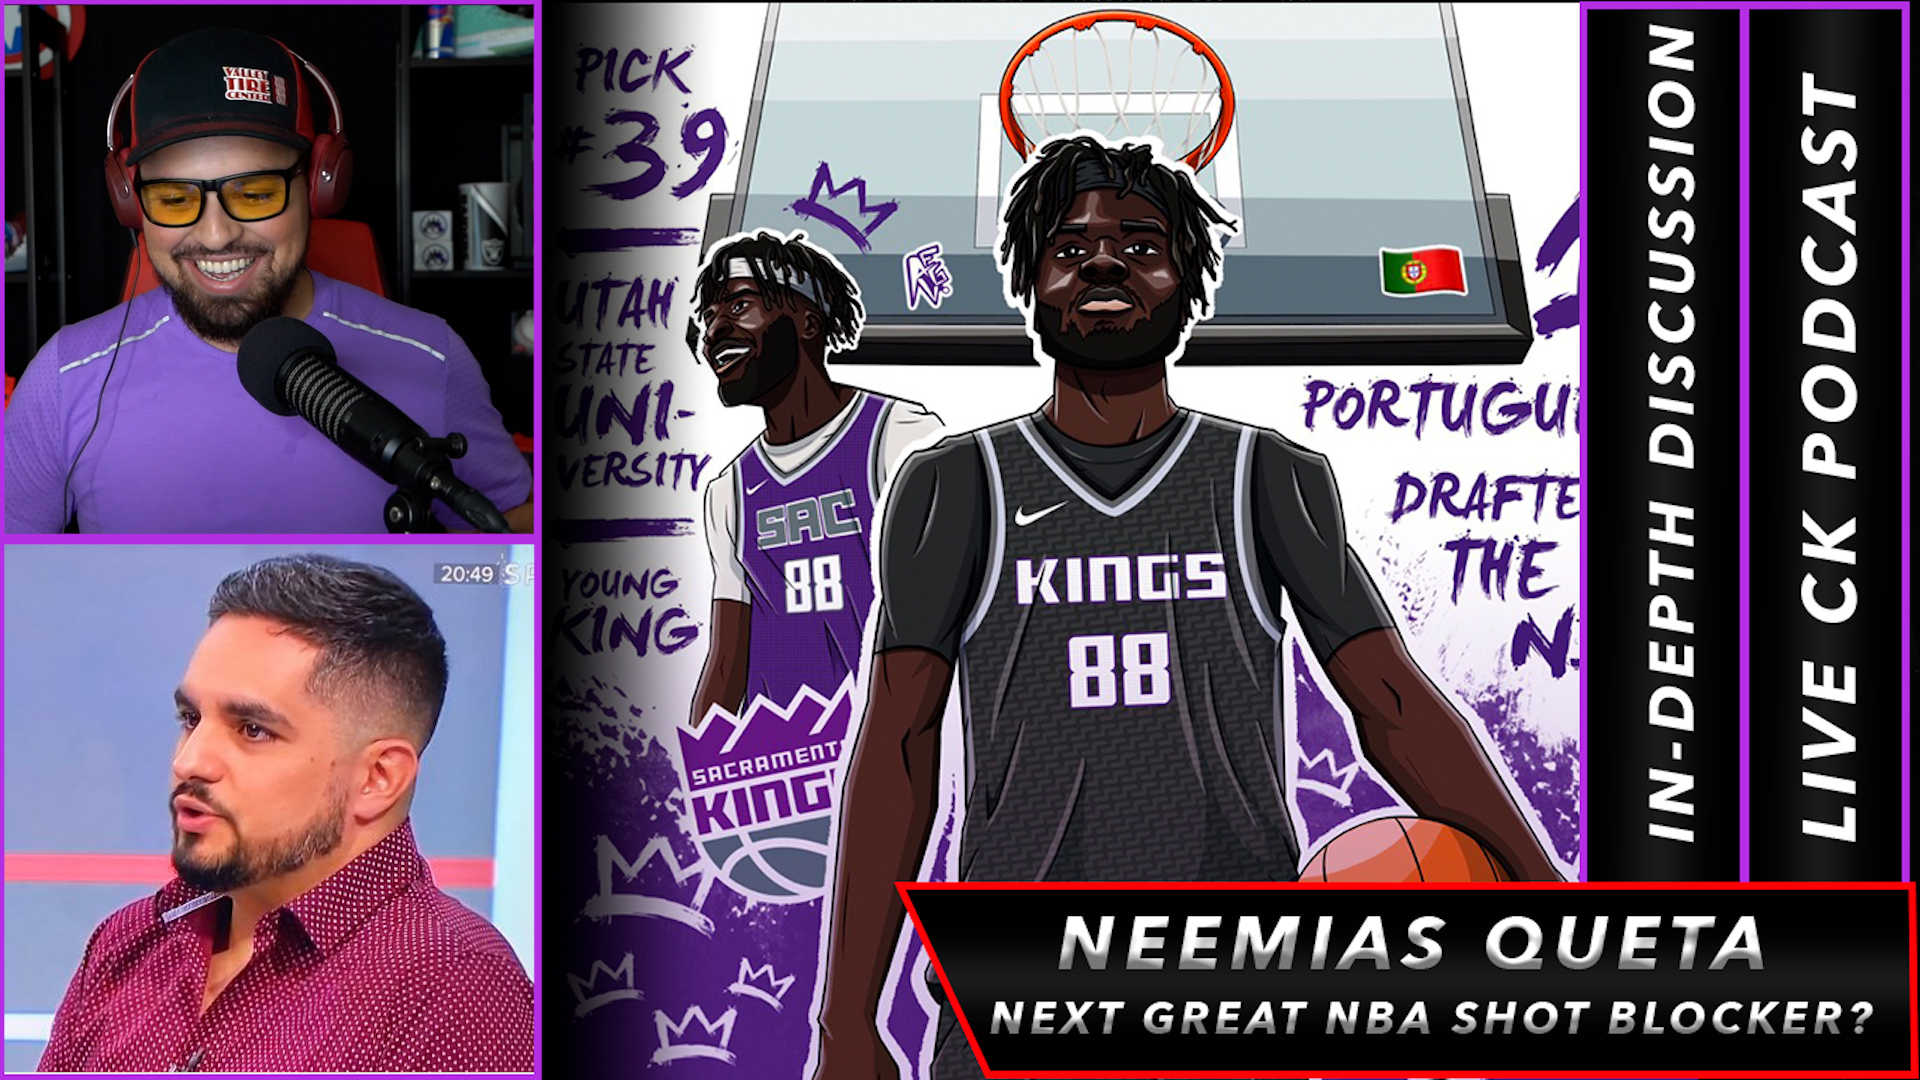 What is Neemias Queta’s True Potential in the NBA?